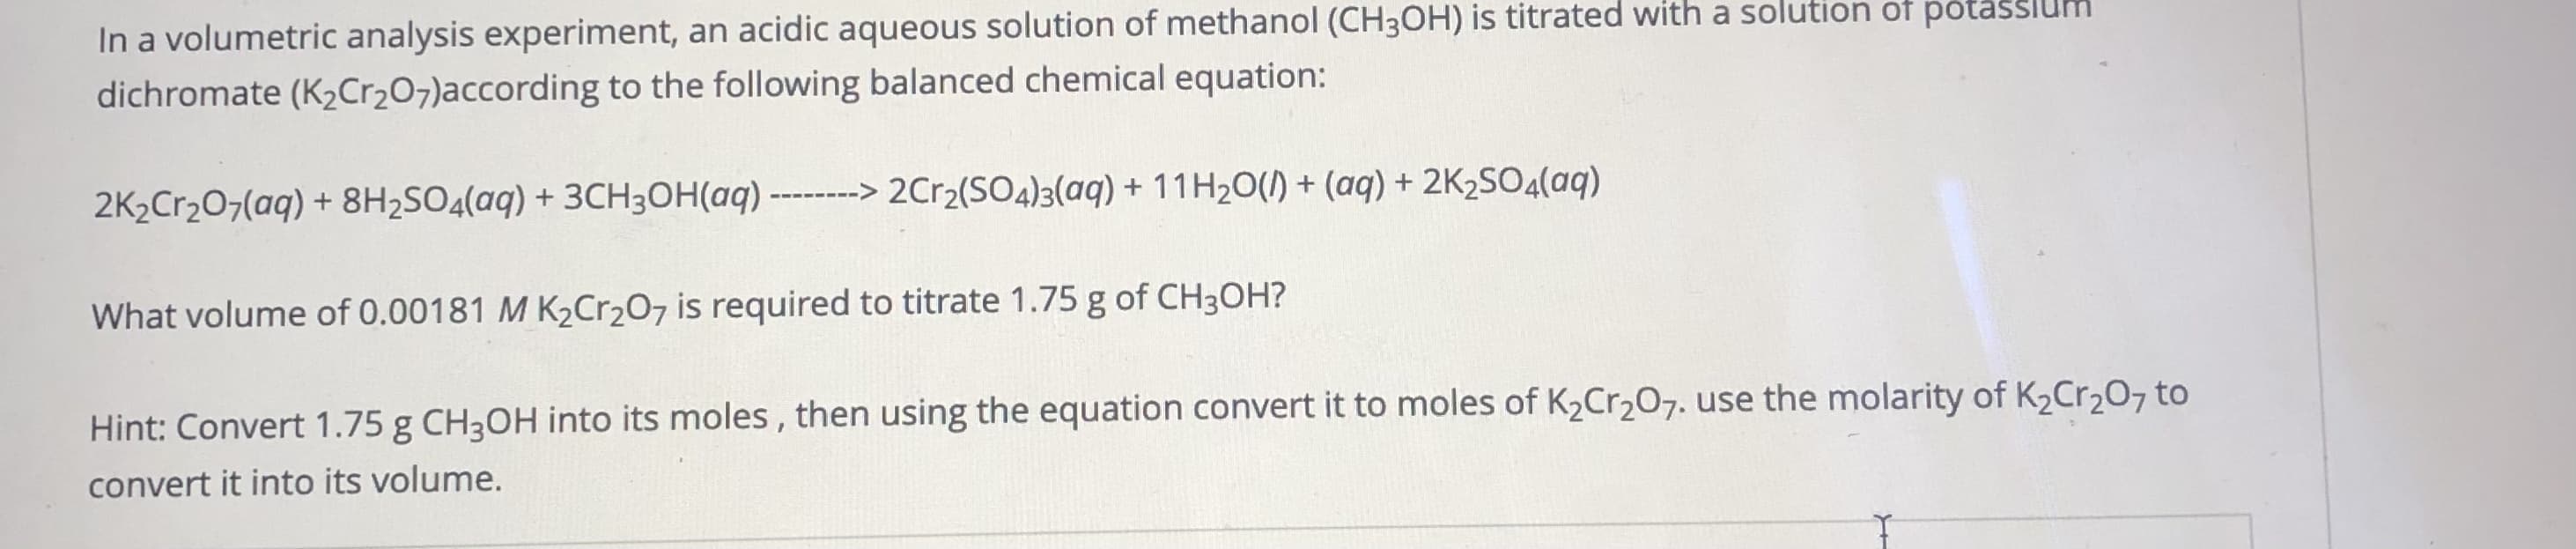 In a volumetric analysis experiment, an acidic aqueous solution of methanol (CH3OH) is titrated with a solutloh of po
dichromate (K2Cr207)according to the following balanced chemical equation:
2K2Cr207(aq) + 8H2SO4(aq) + 3CH3OH(aq) ------> 2Cr2(SO4)3(aq) + 11H20() + (aq) + 2K2SO4(aq)
What volume of 0.00181 M K½Cr2O7 is required to titrate 1.75 g of CH3OH?
Hint: Convert 1.75 g CH3OH into its moles , then using the equation convert it to moles of K2Cr207. use the molarity of K2Cr,O7 to
convert it into its volume.
